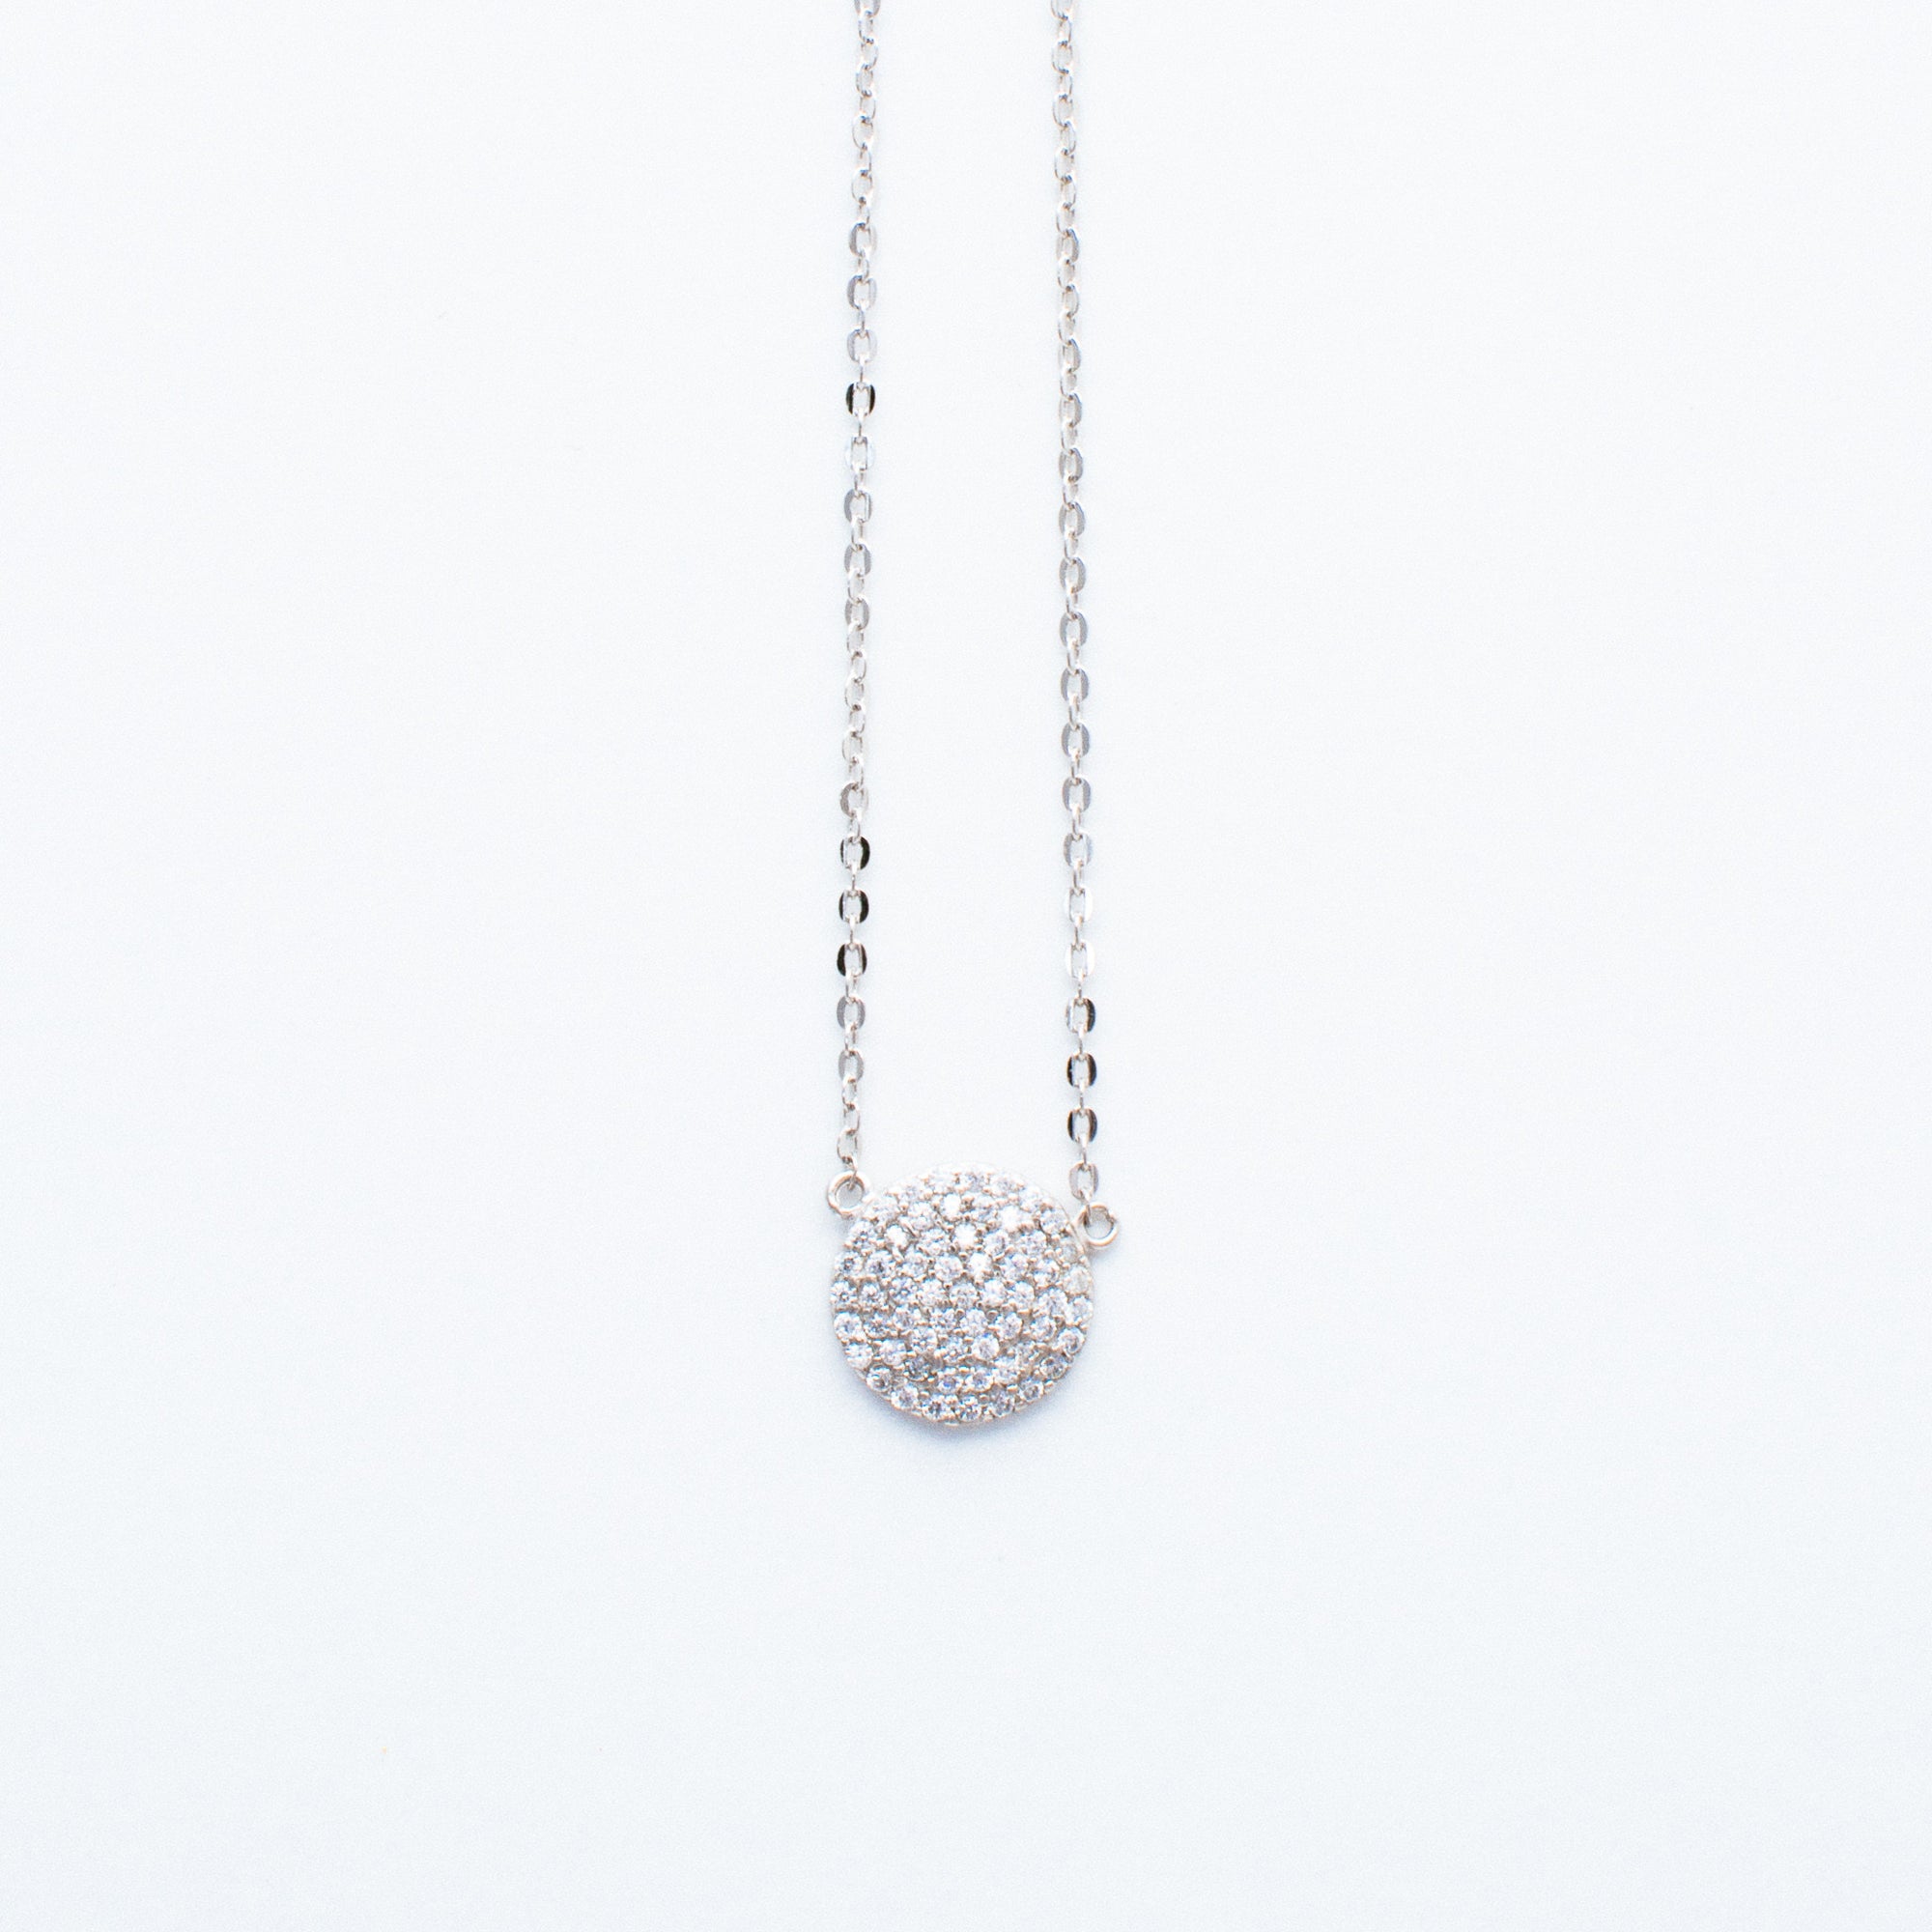 NSC - Pave Round Necklace